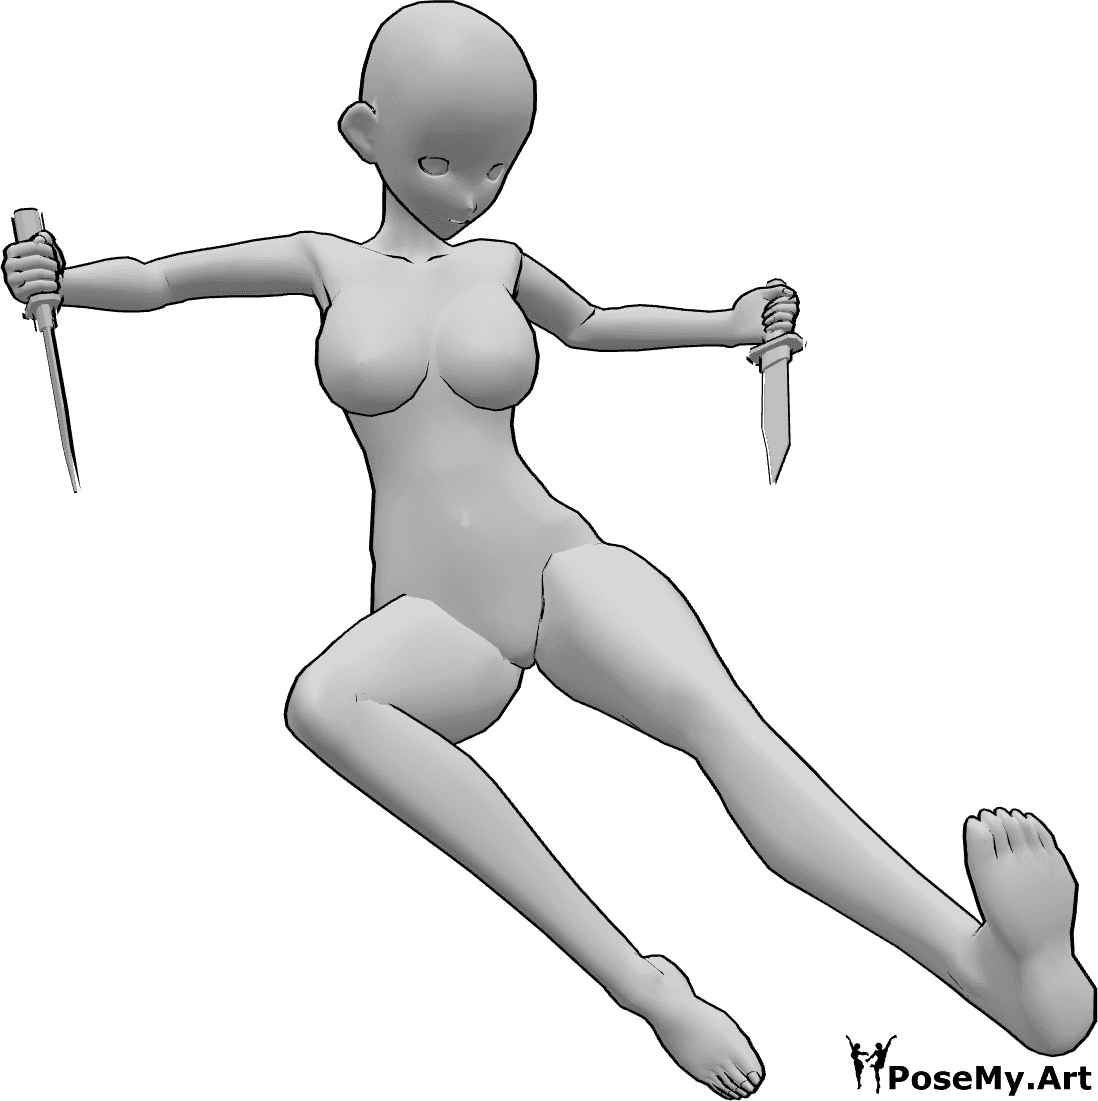 Pose Reference- Anime kicking knife pose - Anime female is jumping, kicking while holding knives in both hands